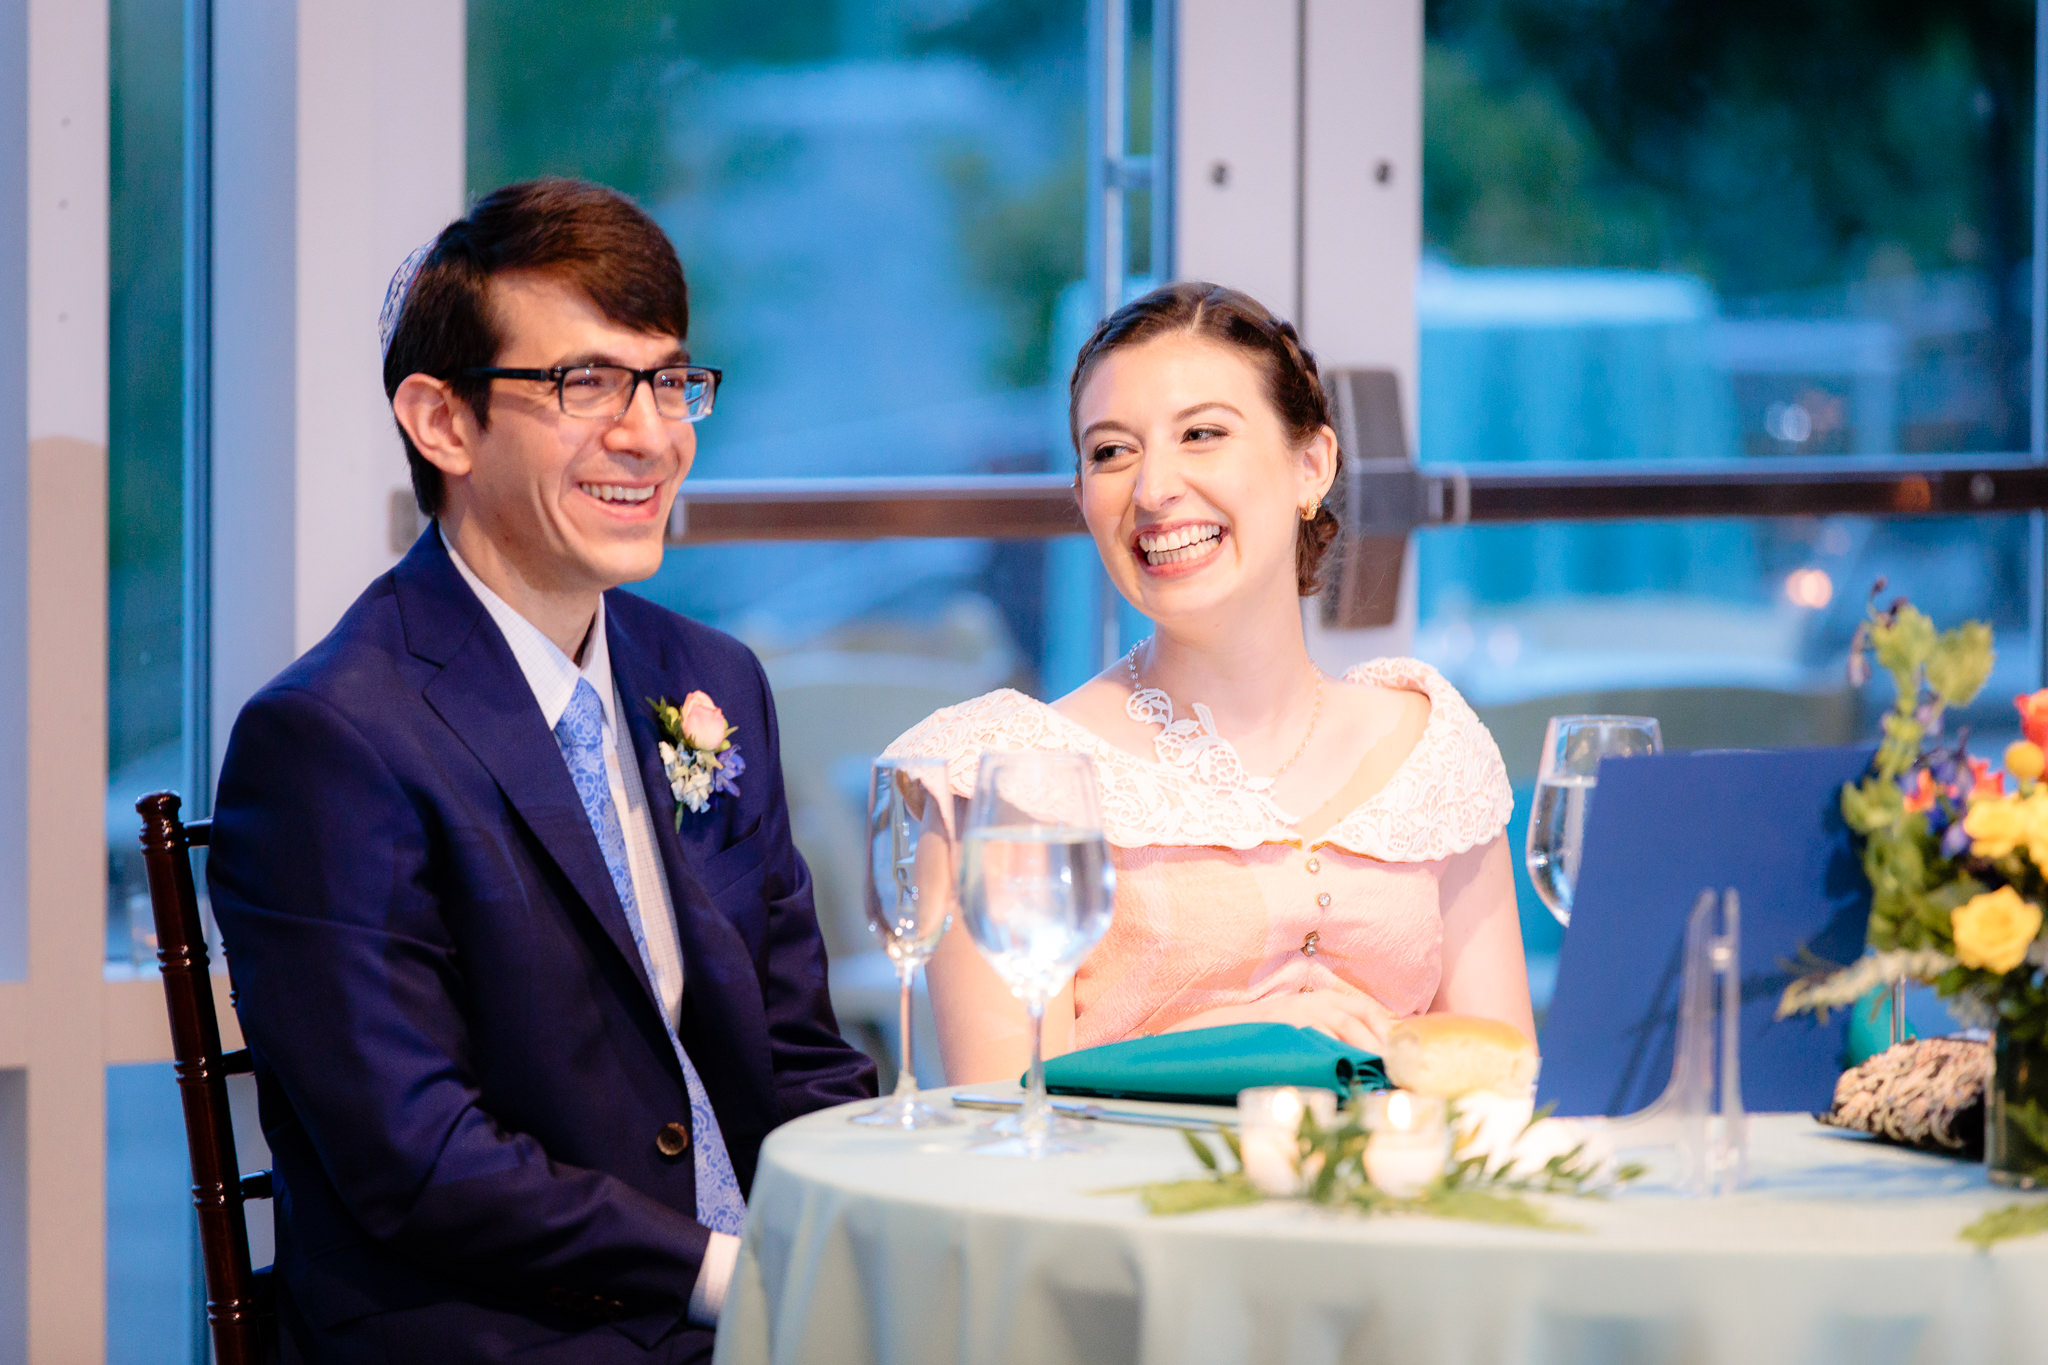 Bride & groom laugh at the sweetheart table at Phipps Conservatory